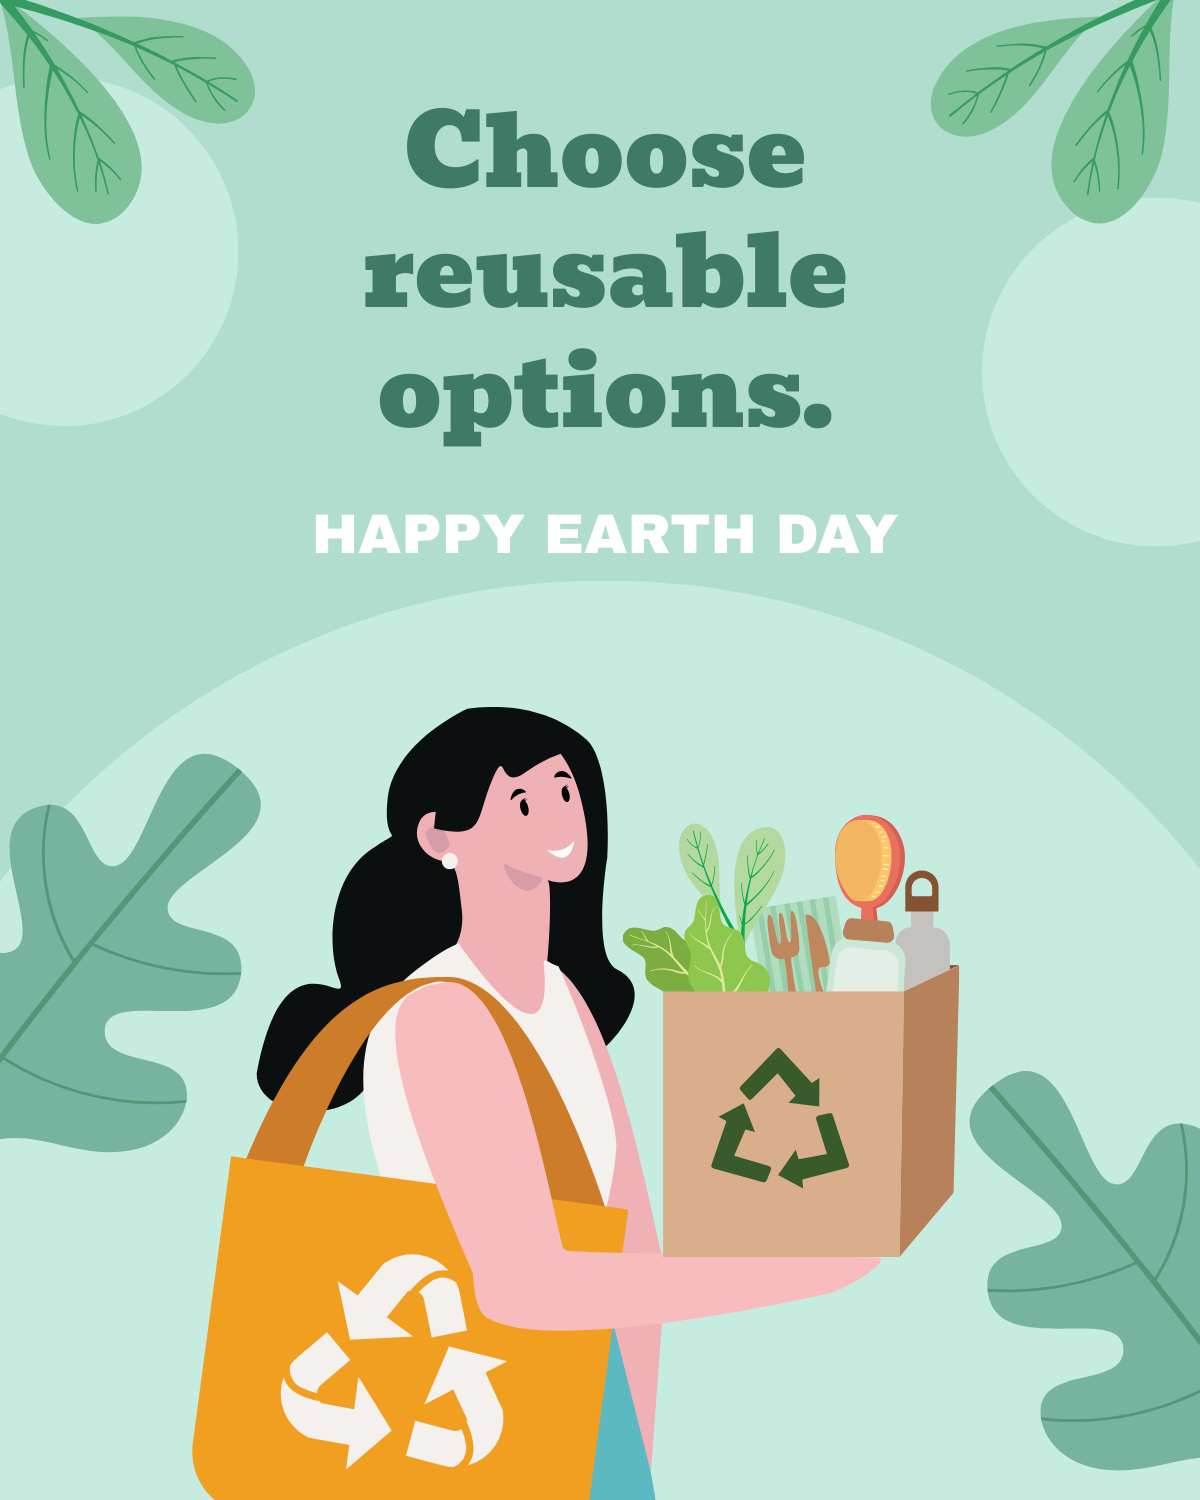 Free Earth Day Facebook Post Template